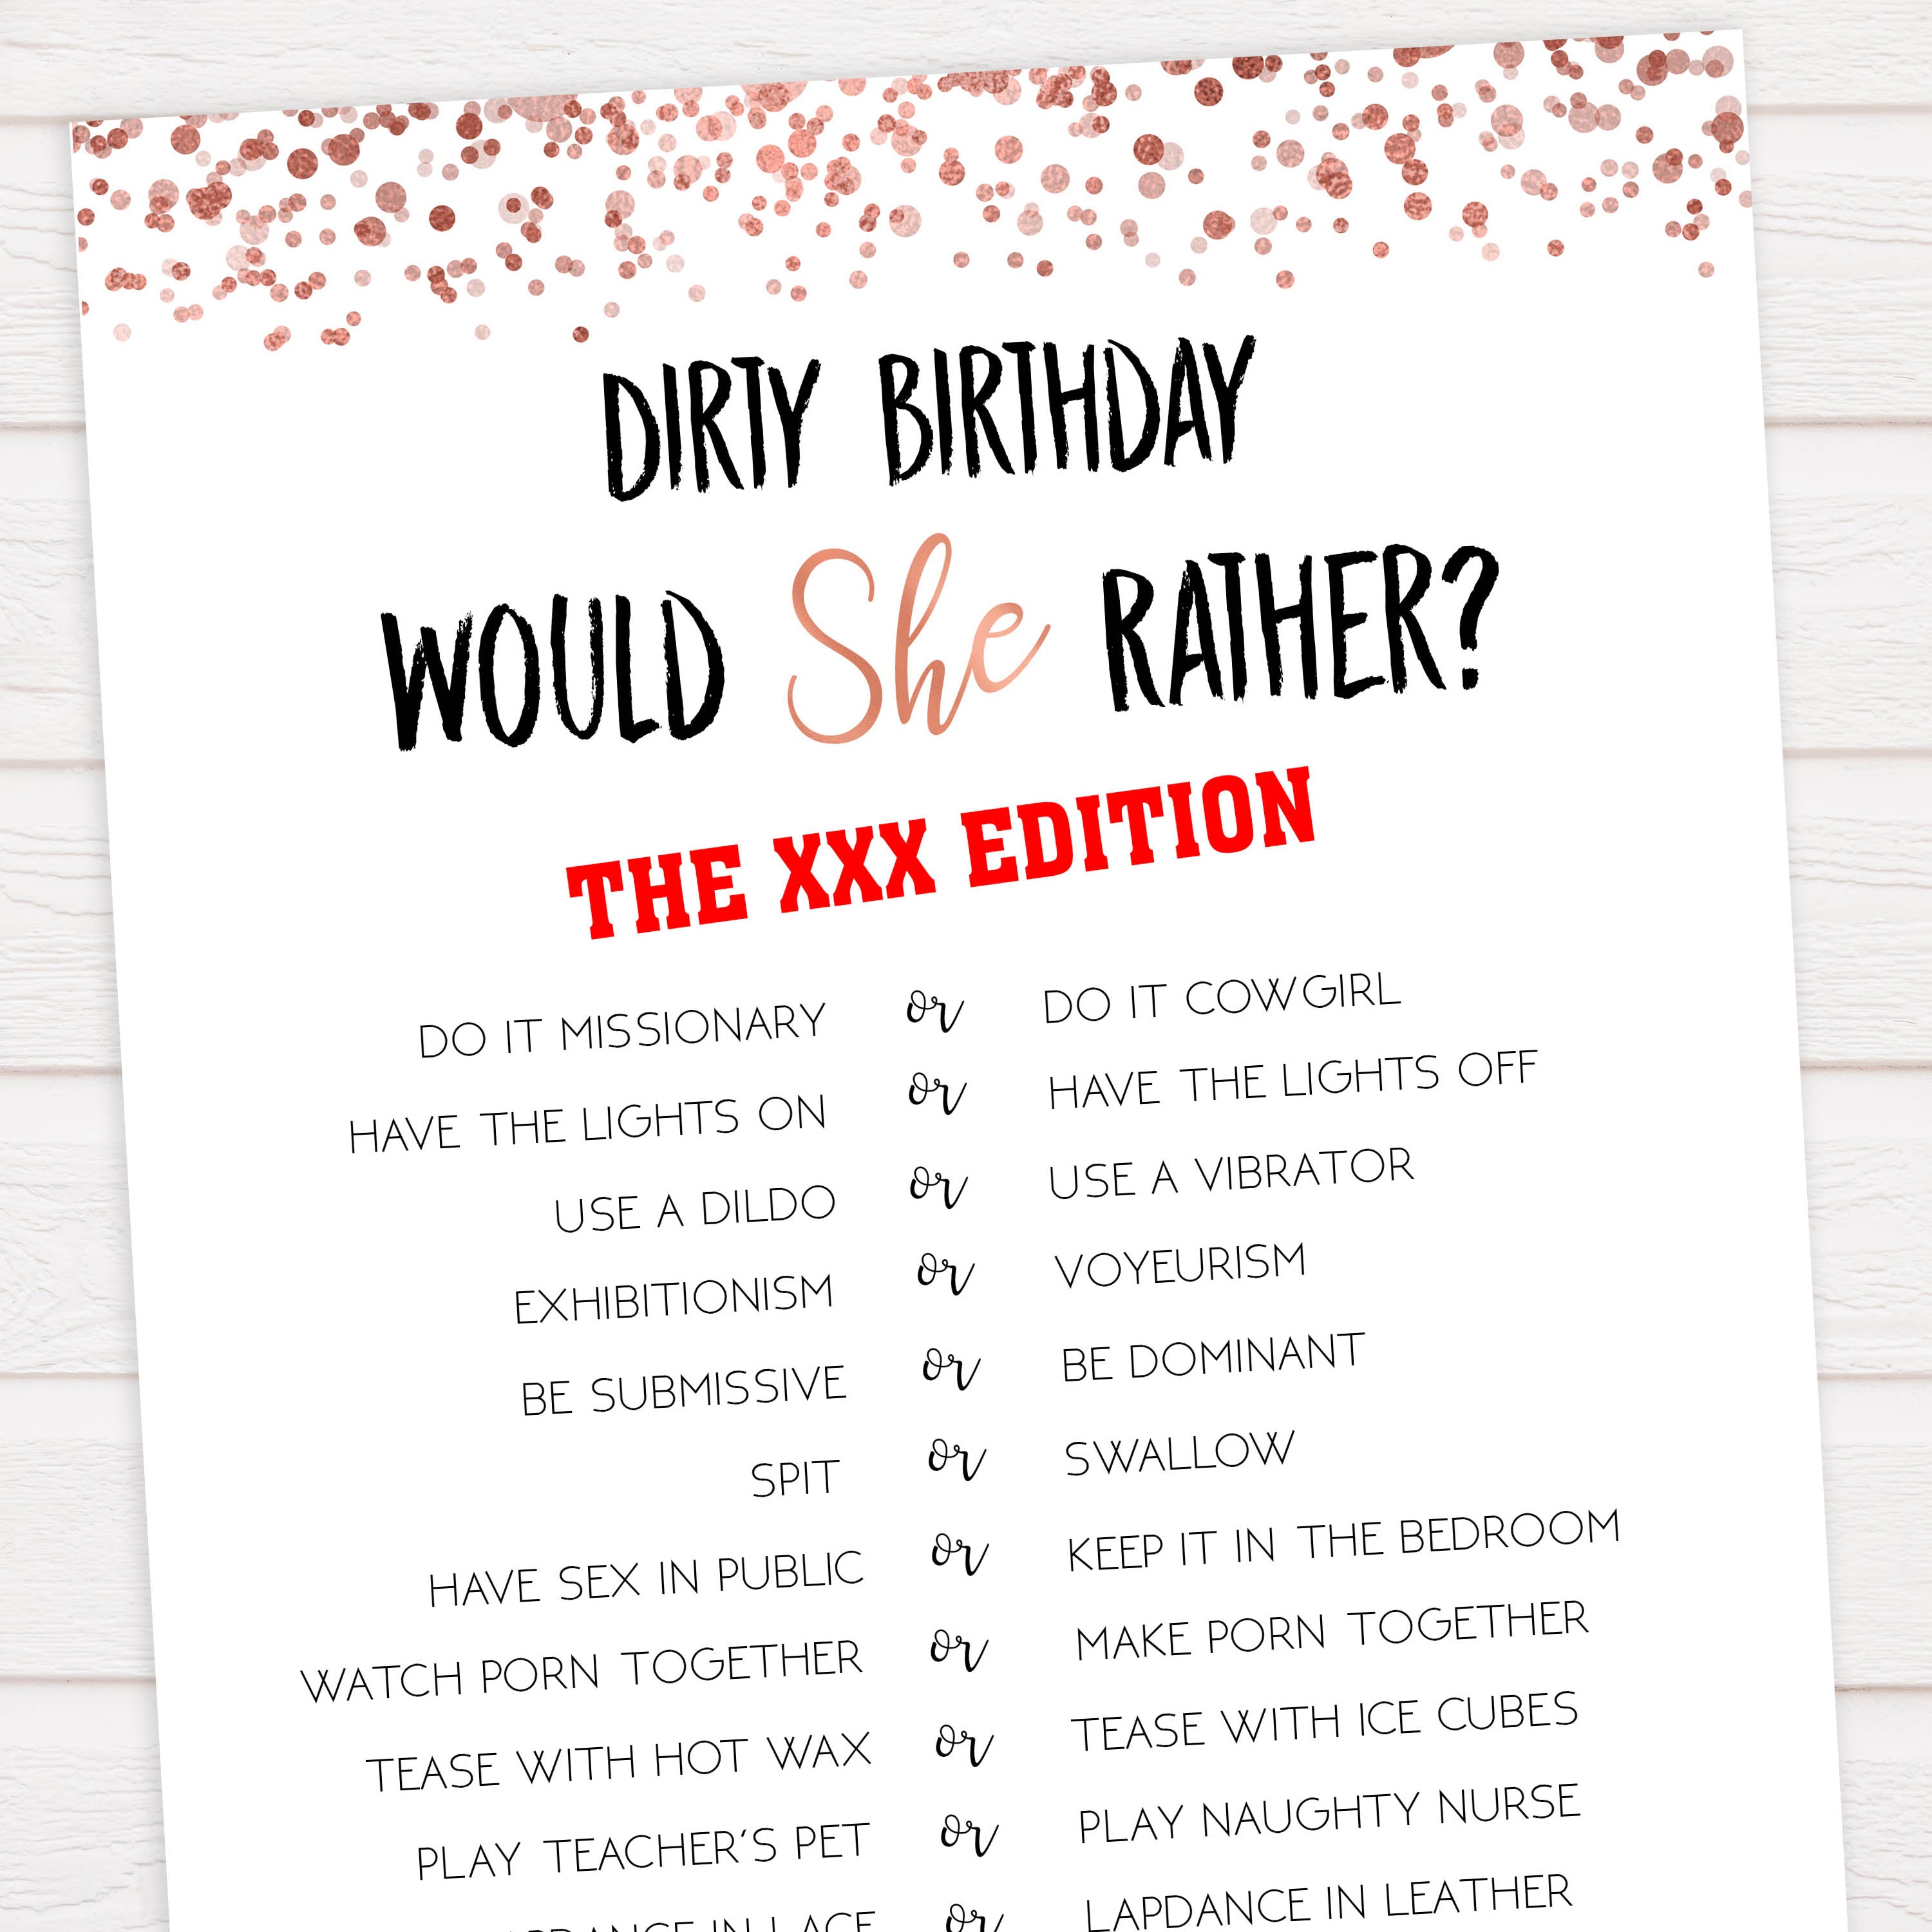 Dirty Would She Rather Printable Birthday Drink If Game image image